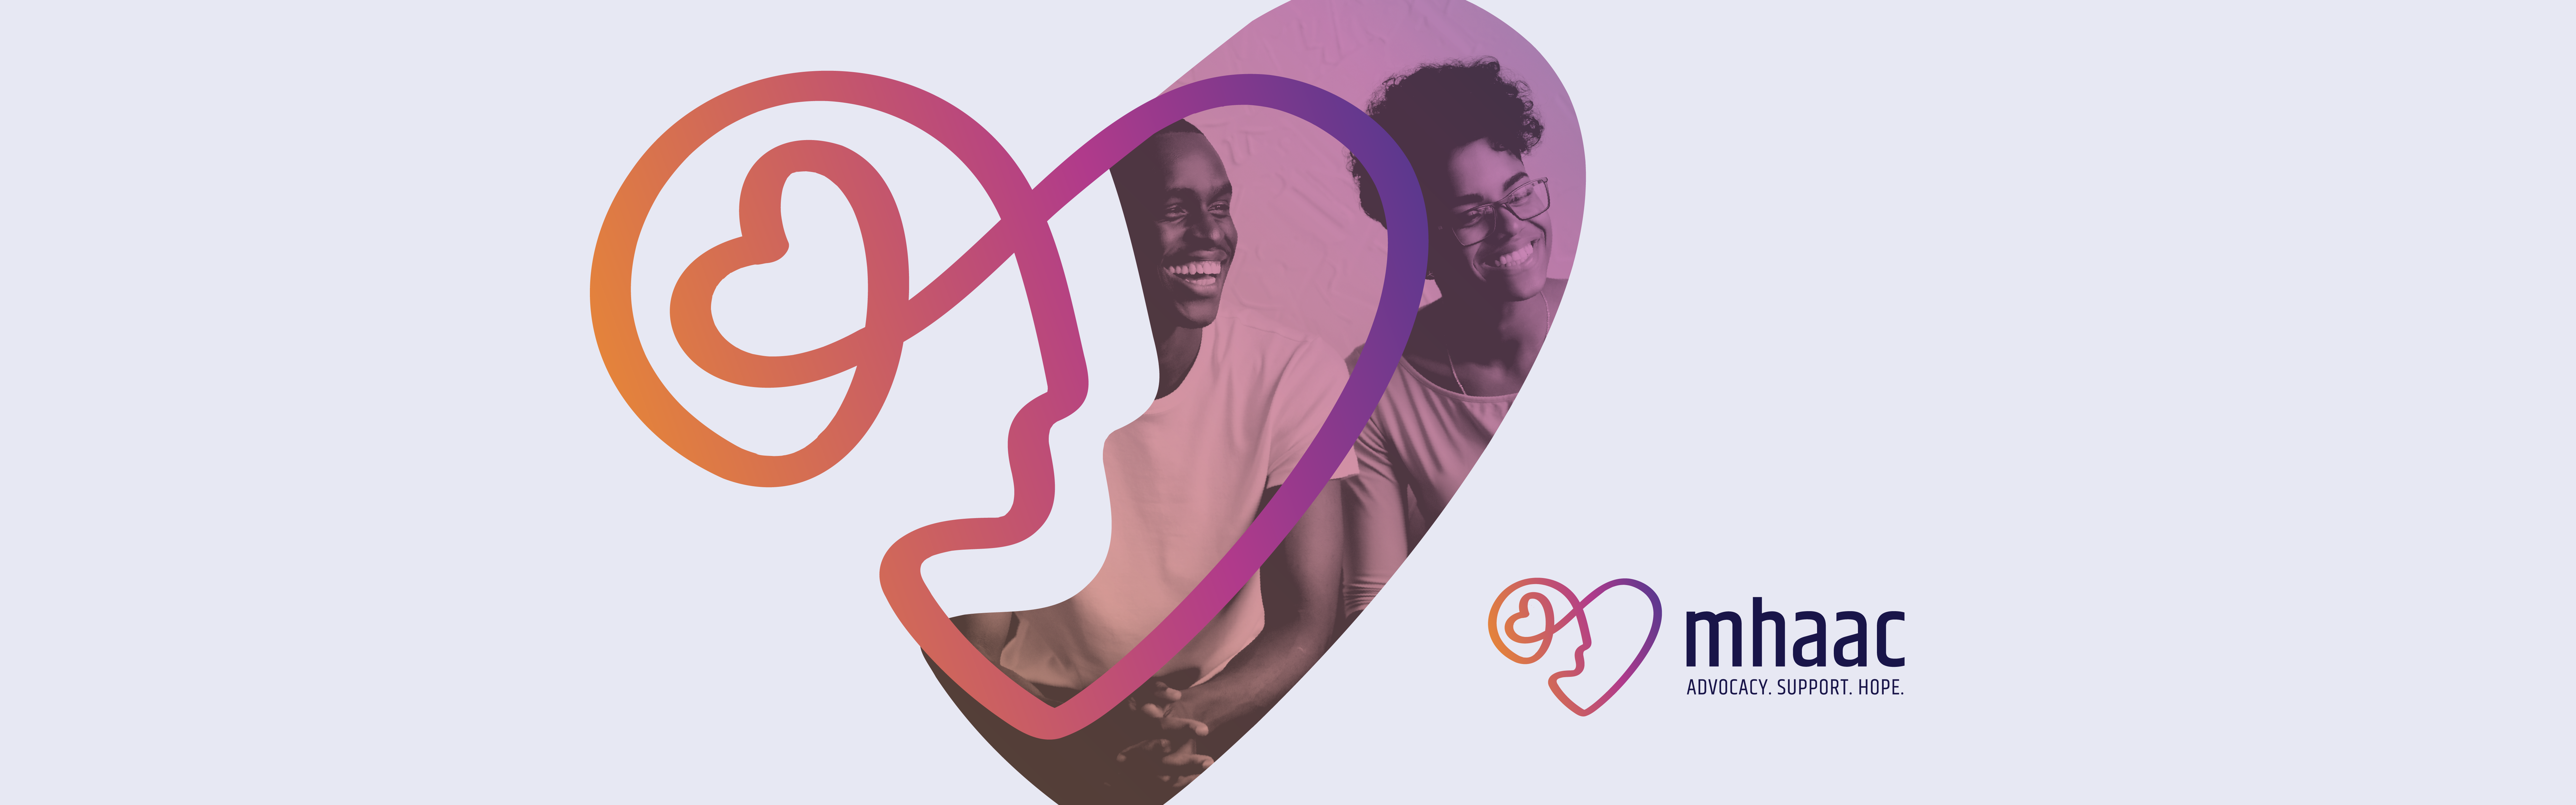 The image displays a graphic for the Mental Health Association with a purple and orange color theme, featuring two smiling individuals within an abstract heart-shaped outline, which is intertwined with an ear-like shape, suggesting a